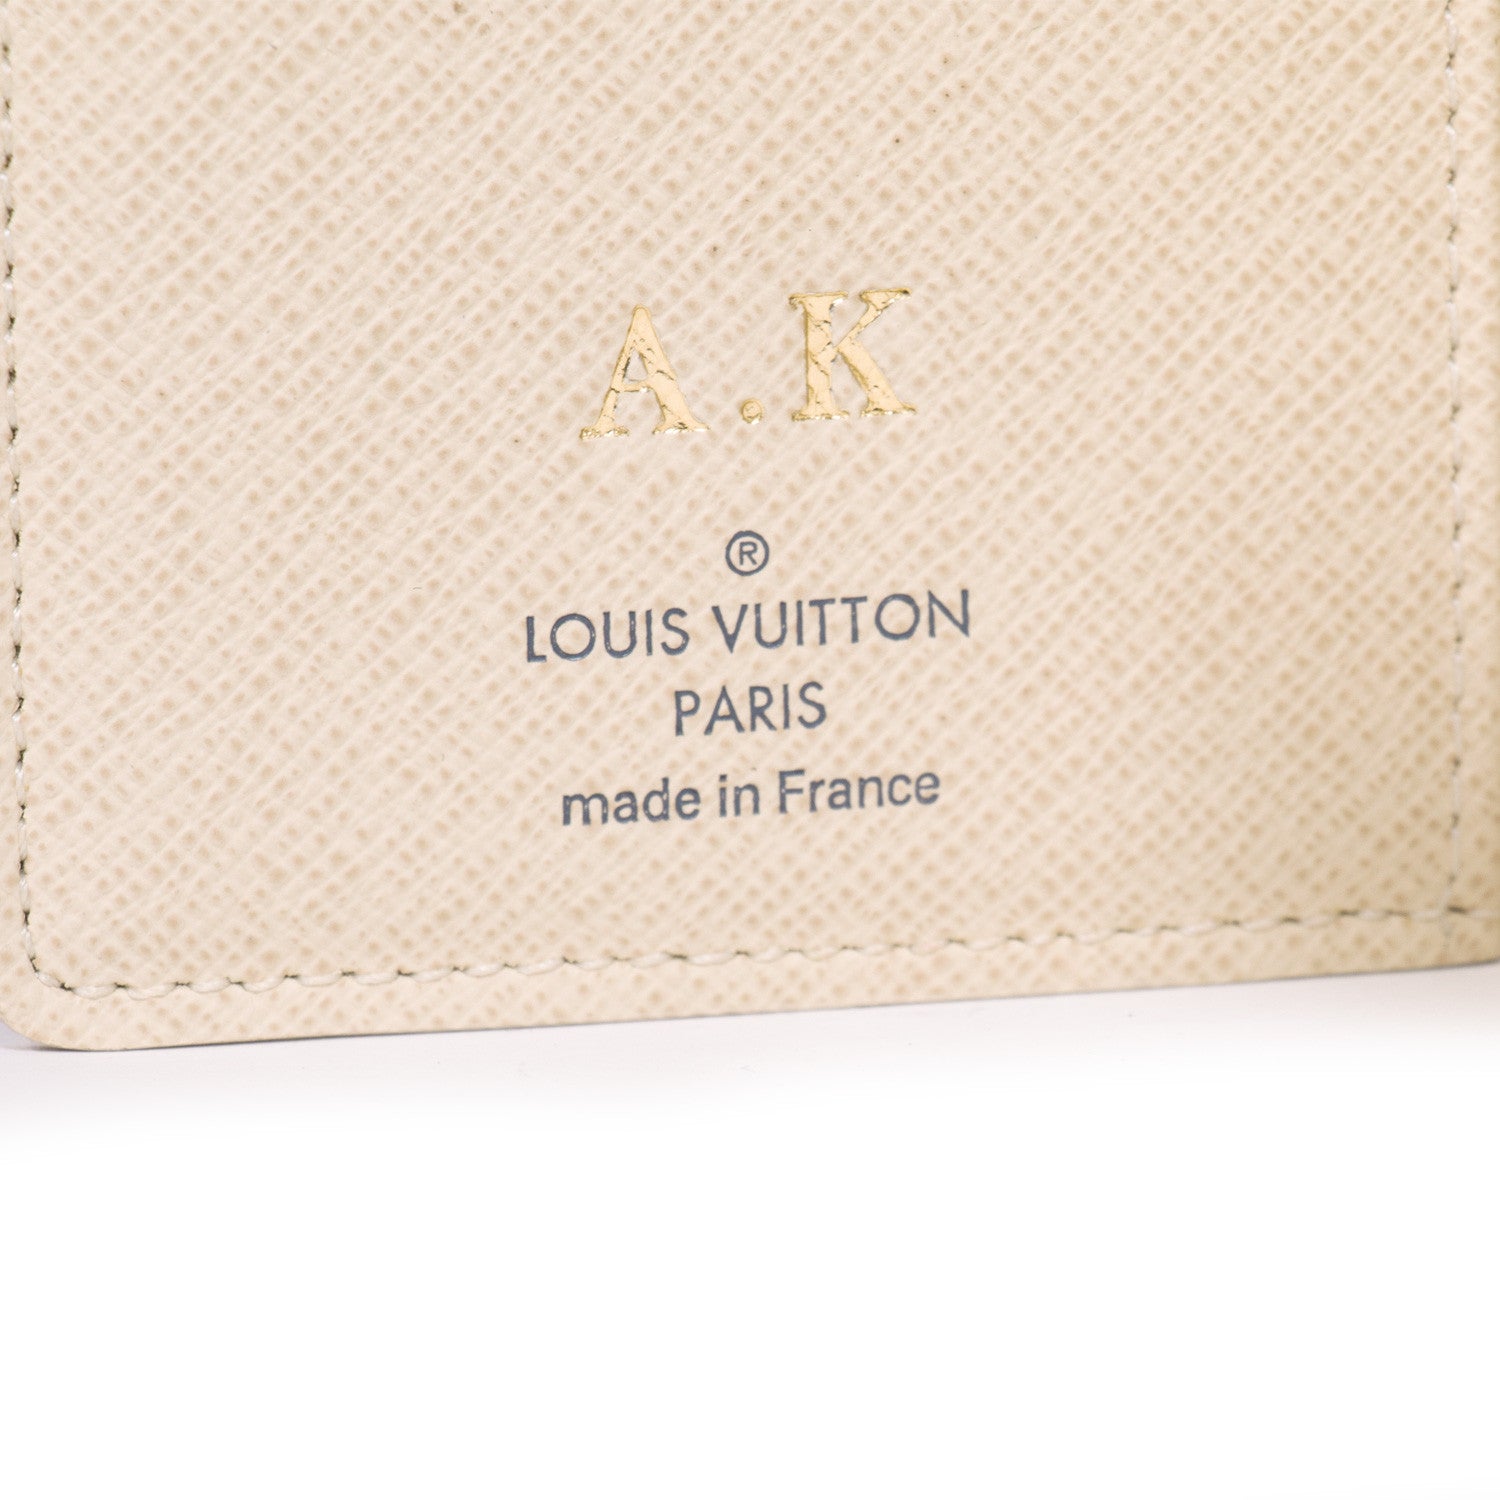 Shop authentic Louis Vuitton French Wallet at revogue for just USD 350.00